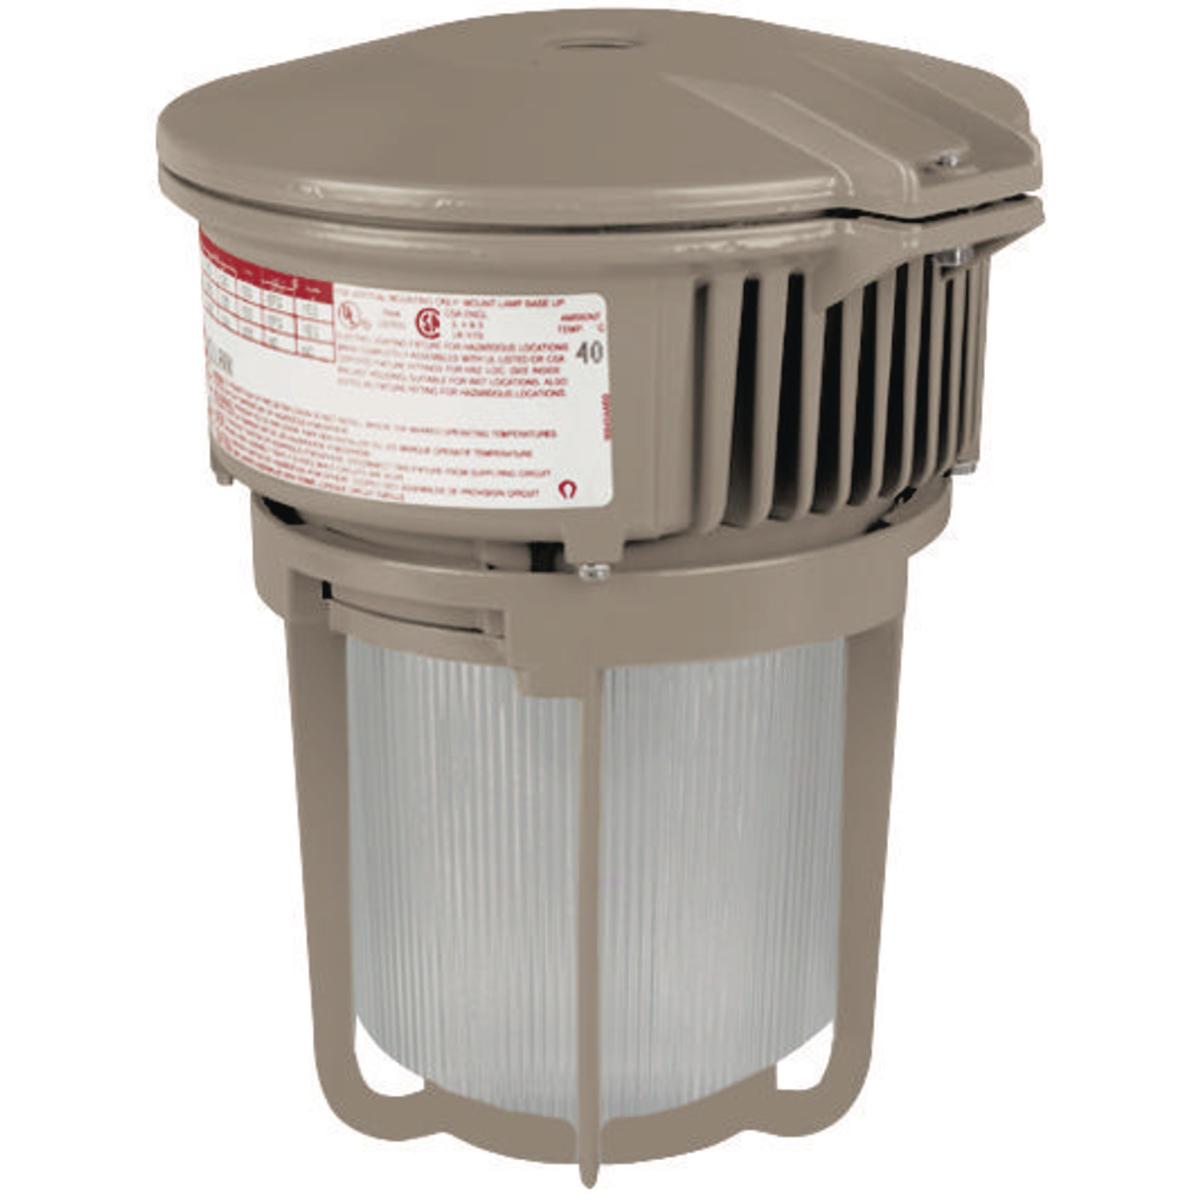 Hubbell MBL4530A2R5G The MBL Series is a compact low bay energy efficient LED. The design of the MBL makes it suitable for harsh and hazardous environments using a cast copper-free aluminum. Its low profile and compact design allow the MBL to fit in areas where larger fixture